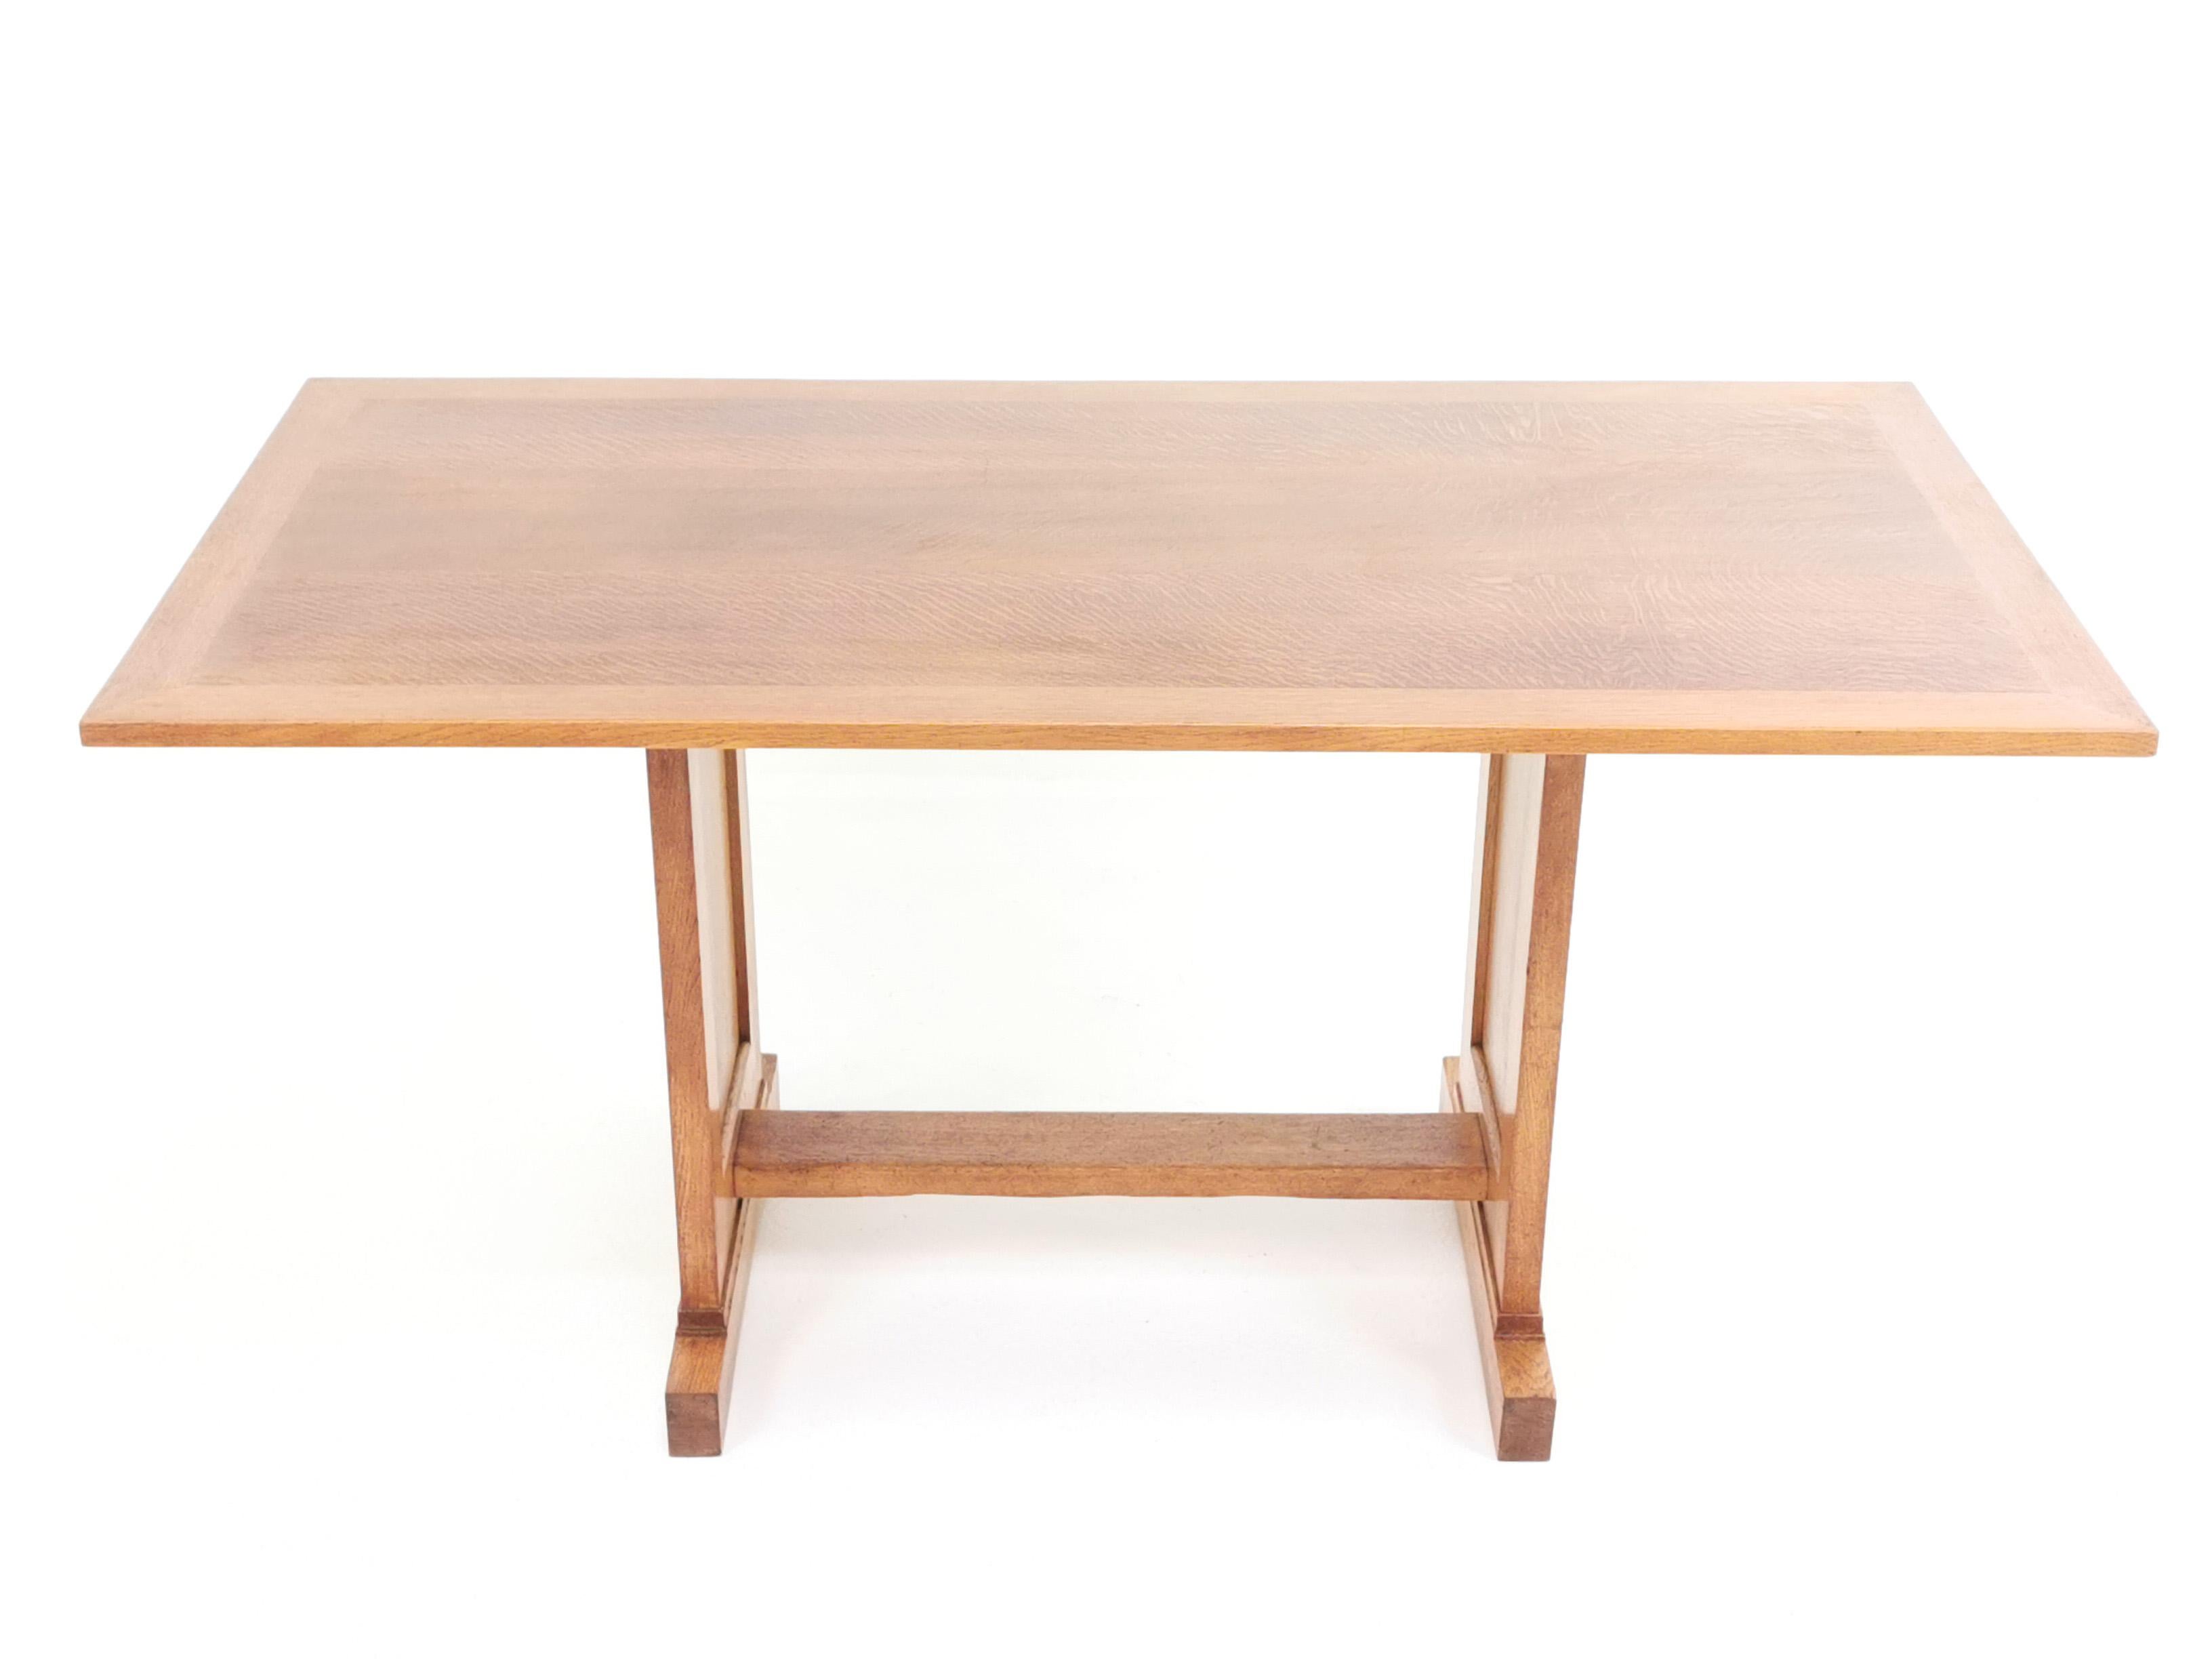 20th Century British Arts & Crafts Cotswold School Oak Dining Table